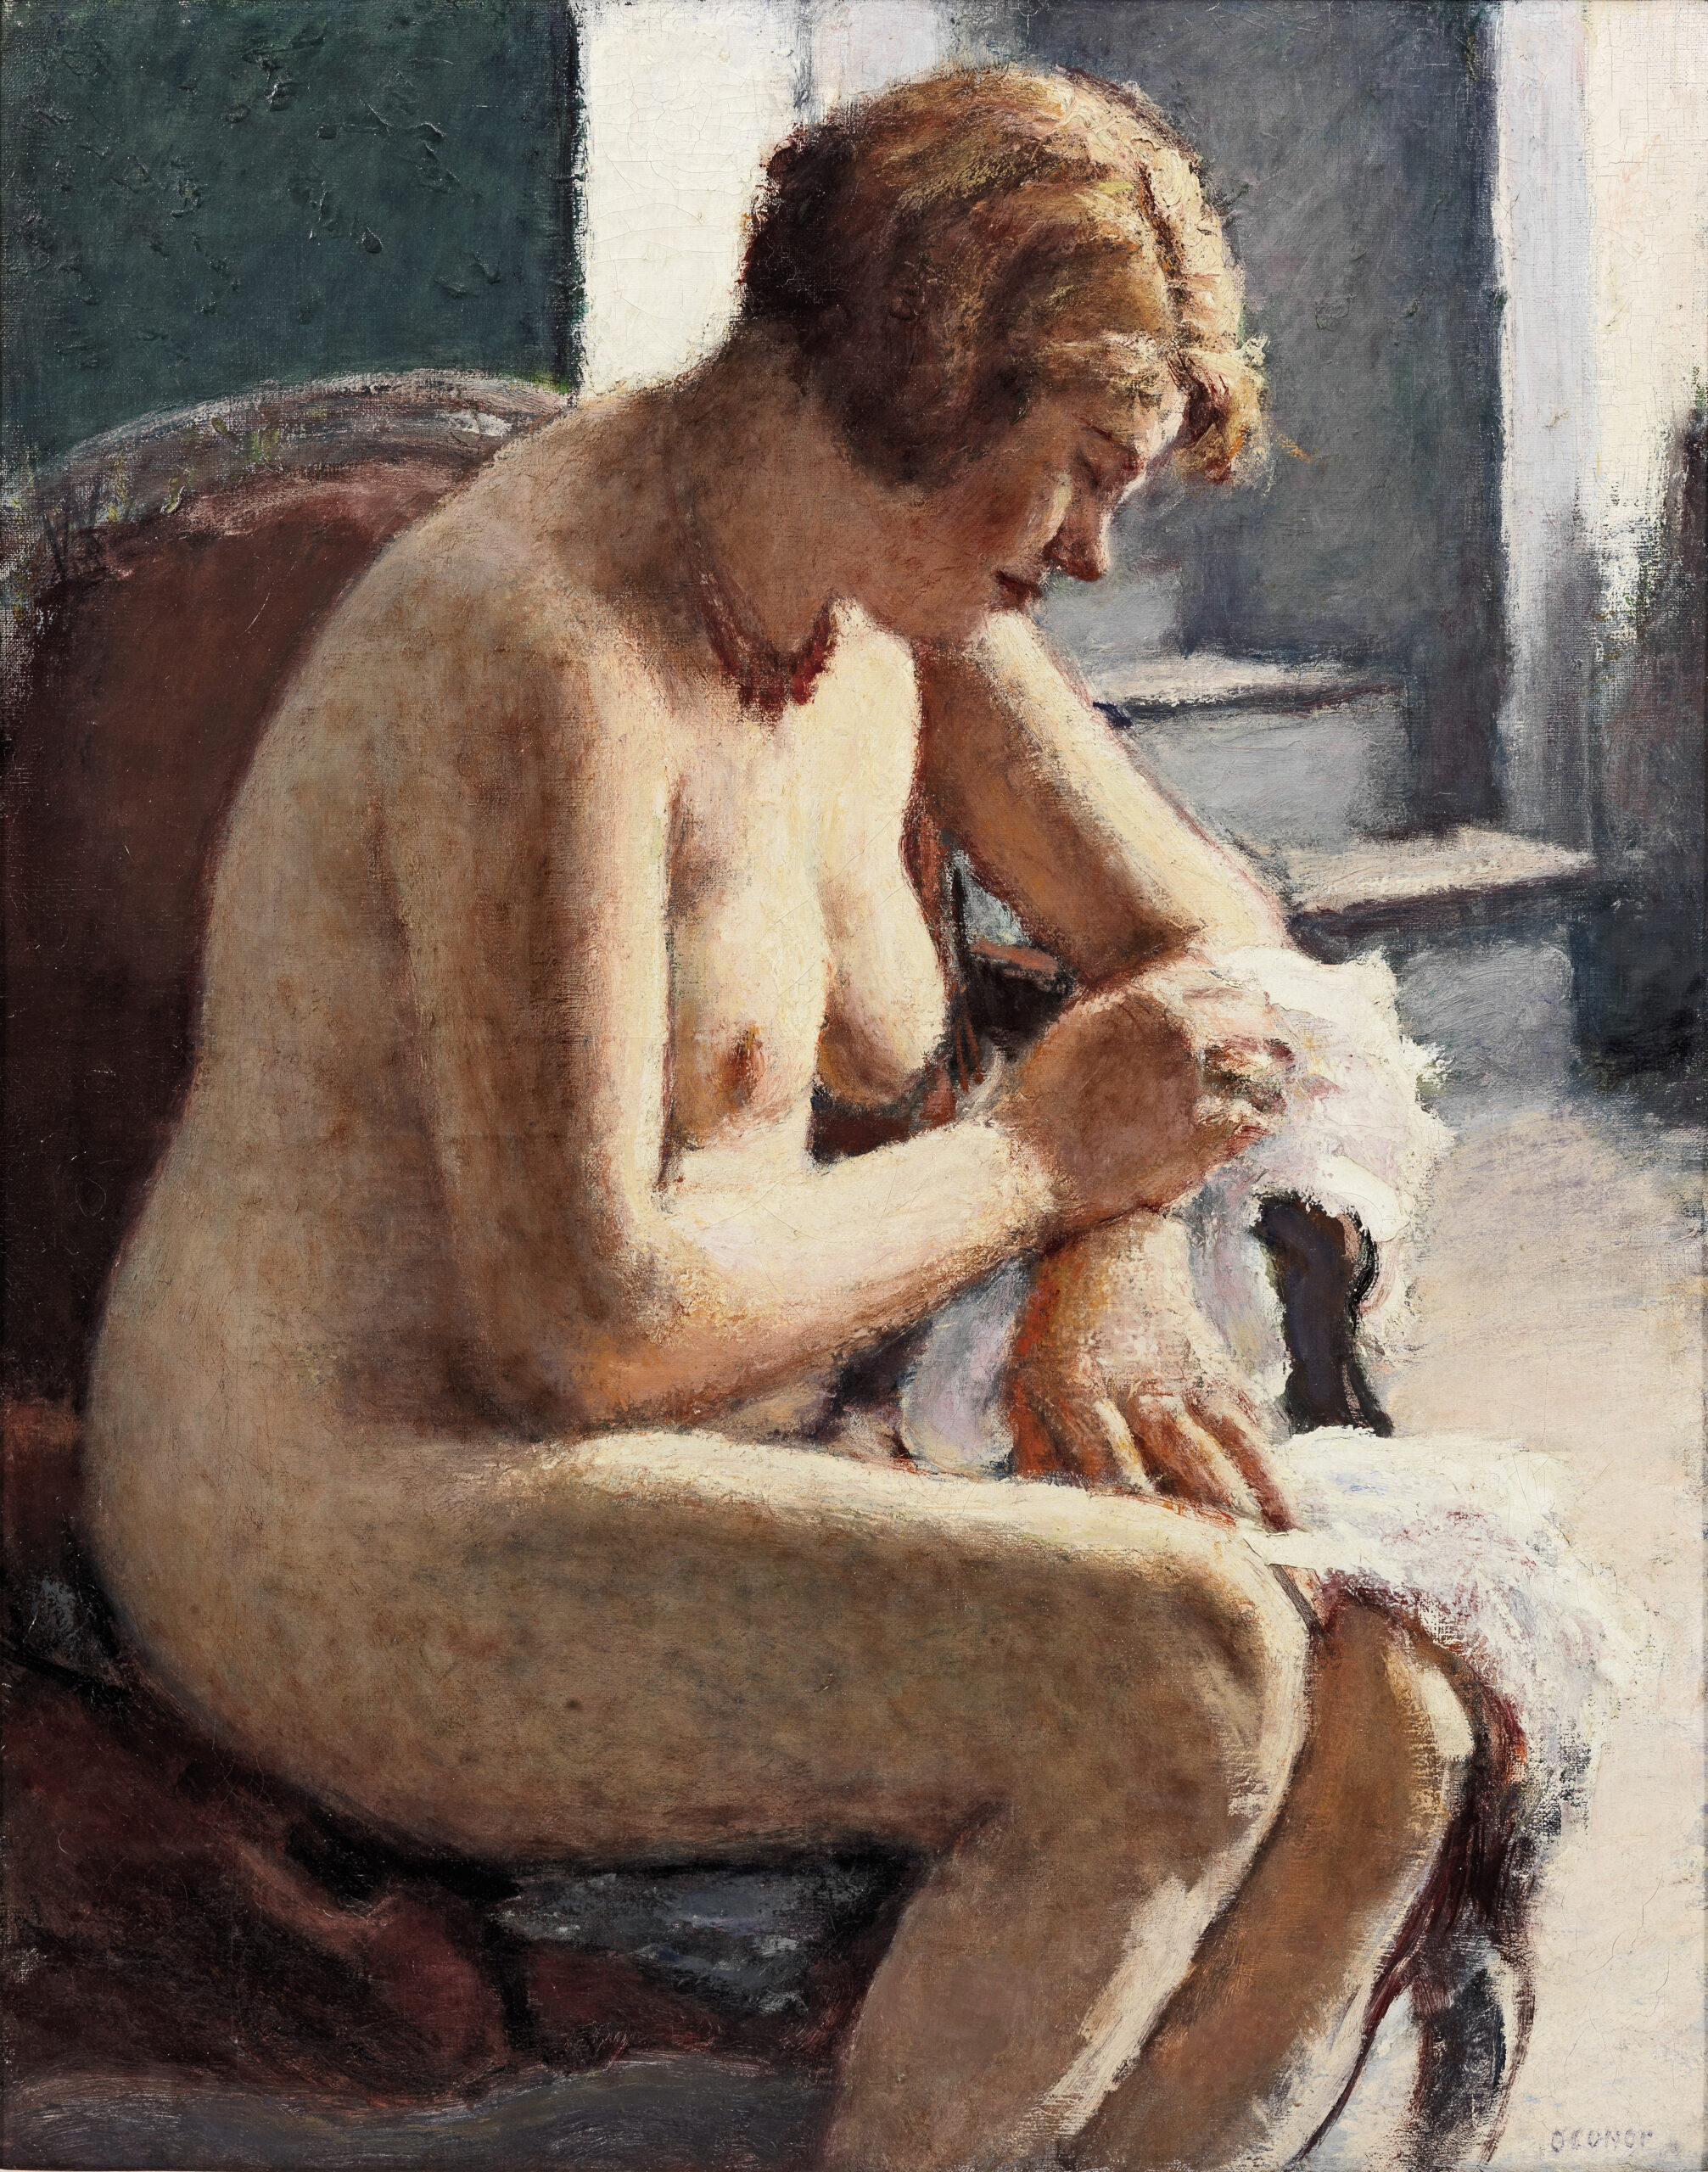 Seated Nude with Red Hair (La Toilette)